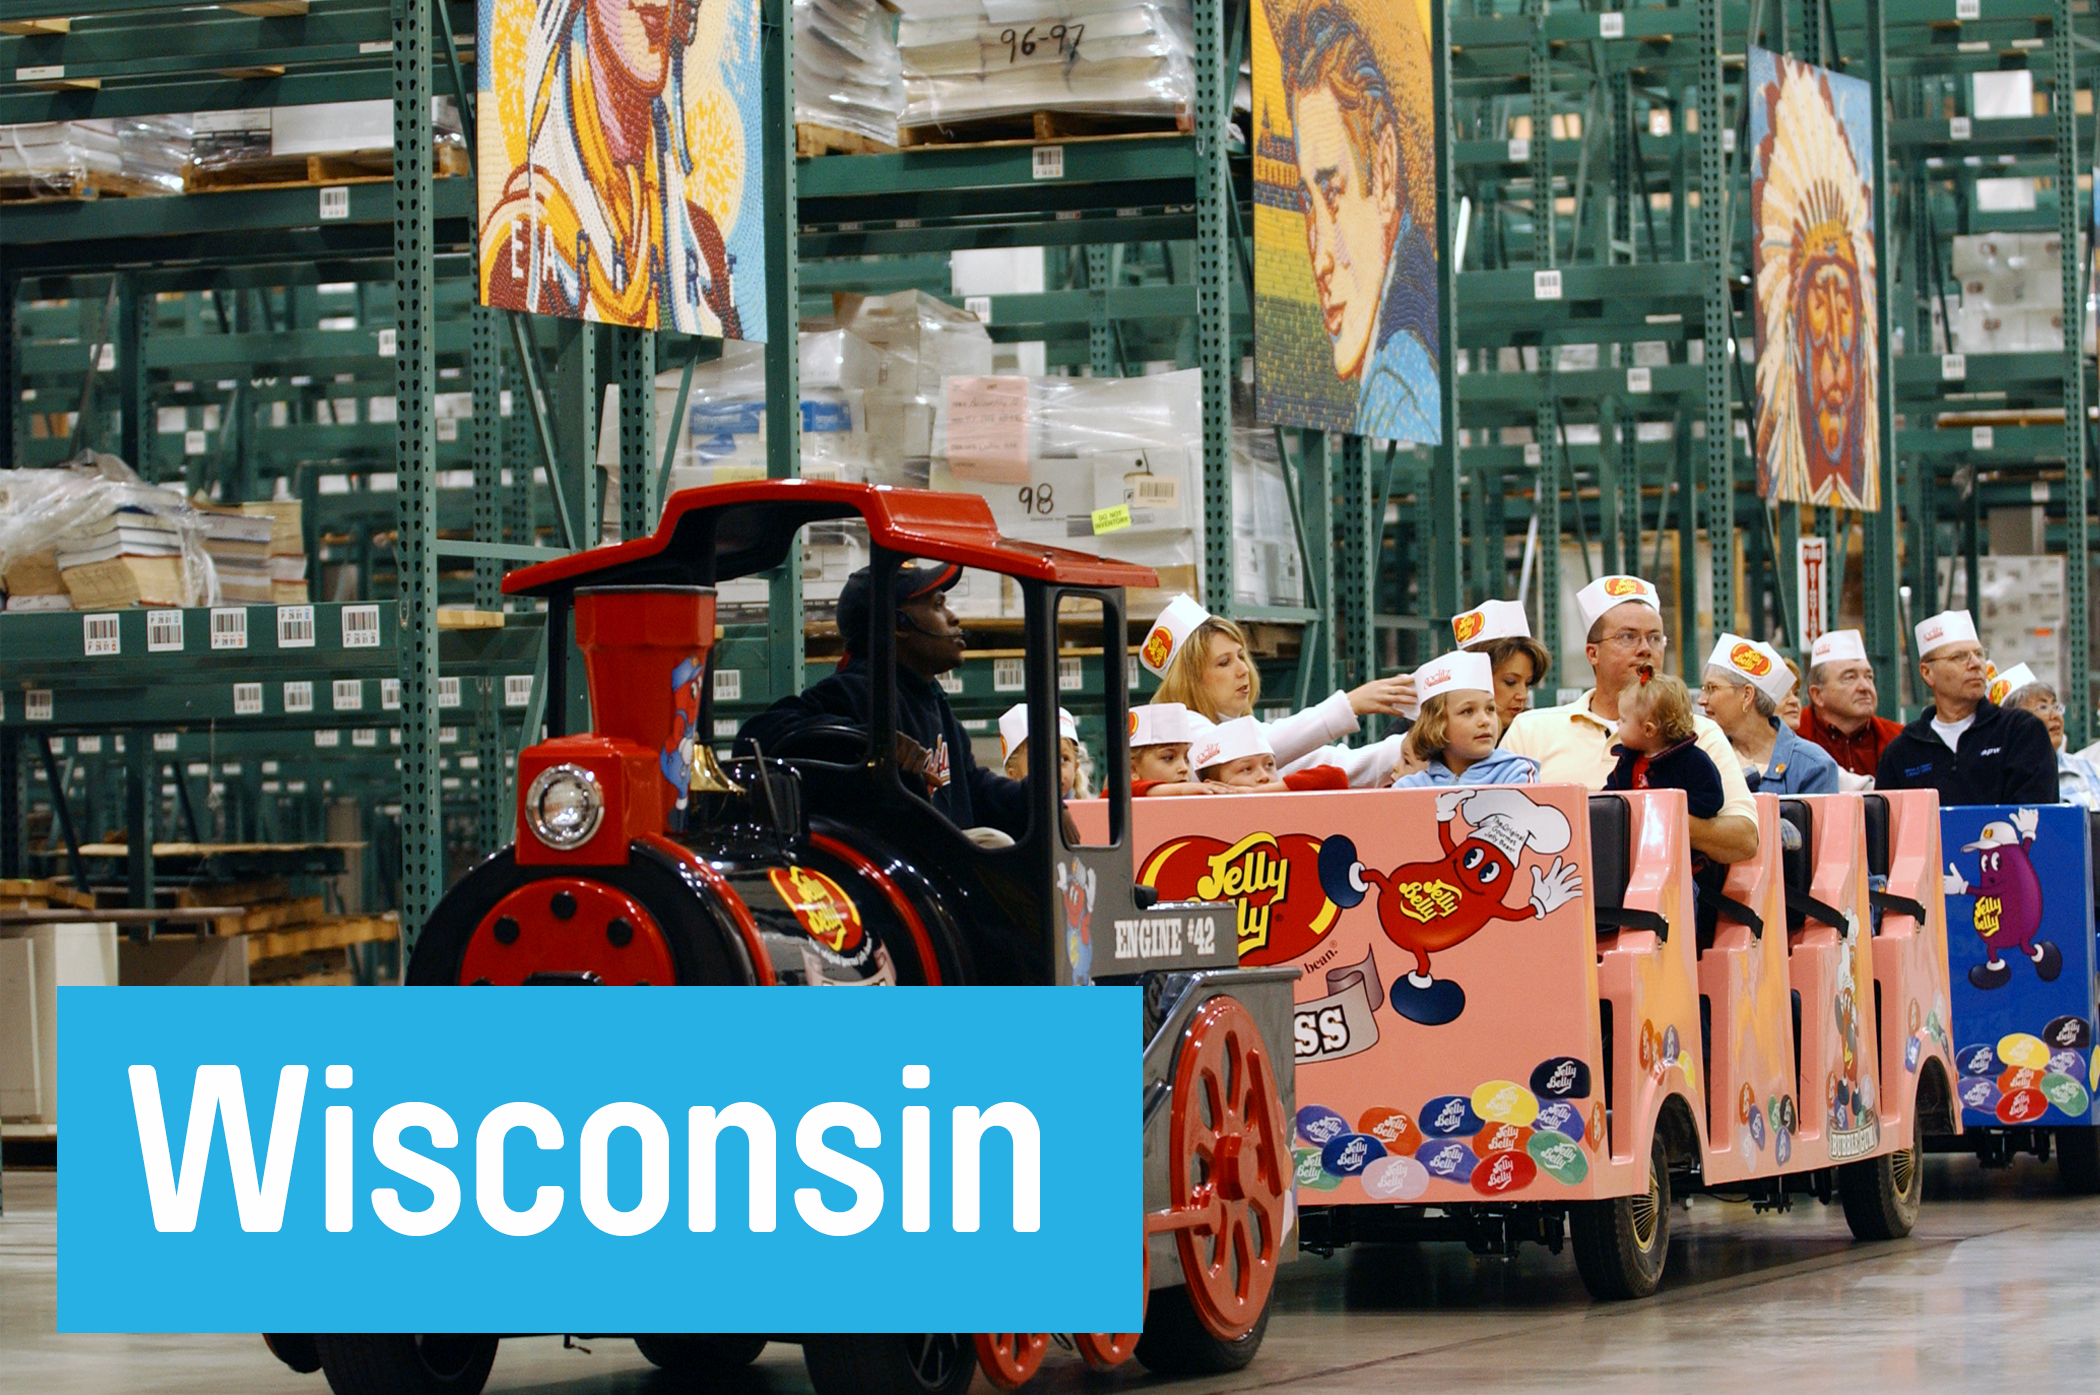 Take a sweet “train” ride through the Pleasant Prairie warehouse of Jelly Belly, where the <a href="http://www.jellybelly.com/wisconsin-warehouse" target="_blank">30-minute tour</a> includes a bag of the candy.